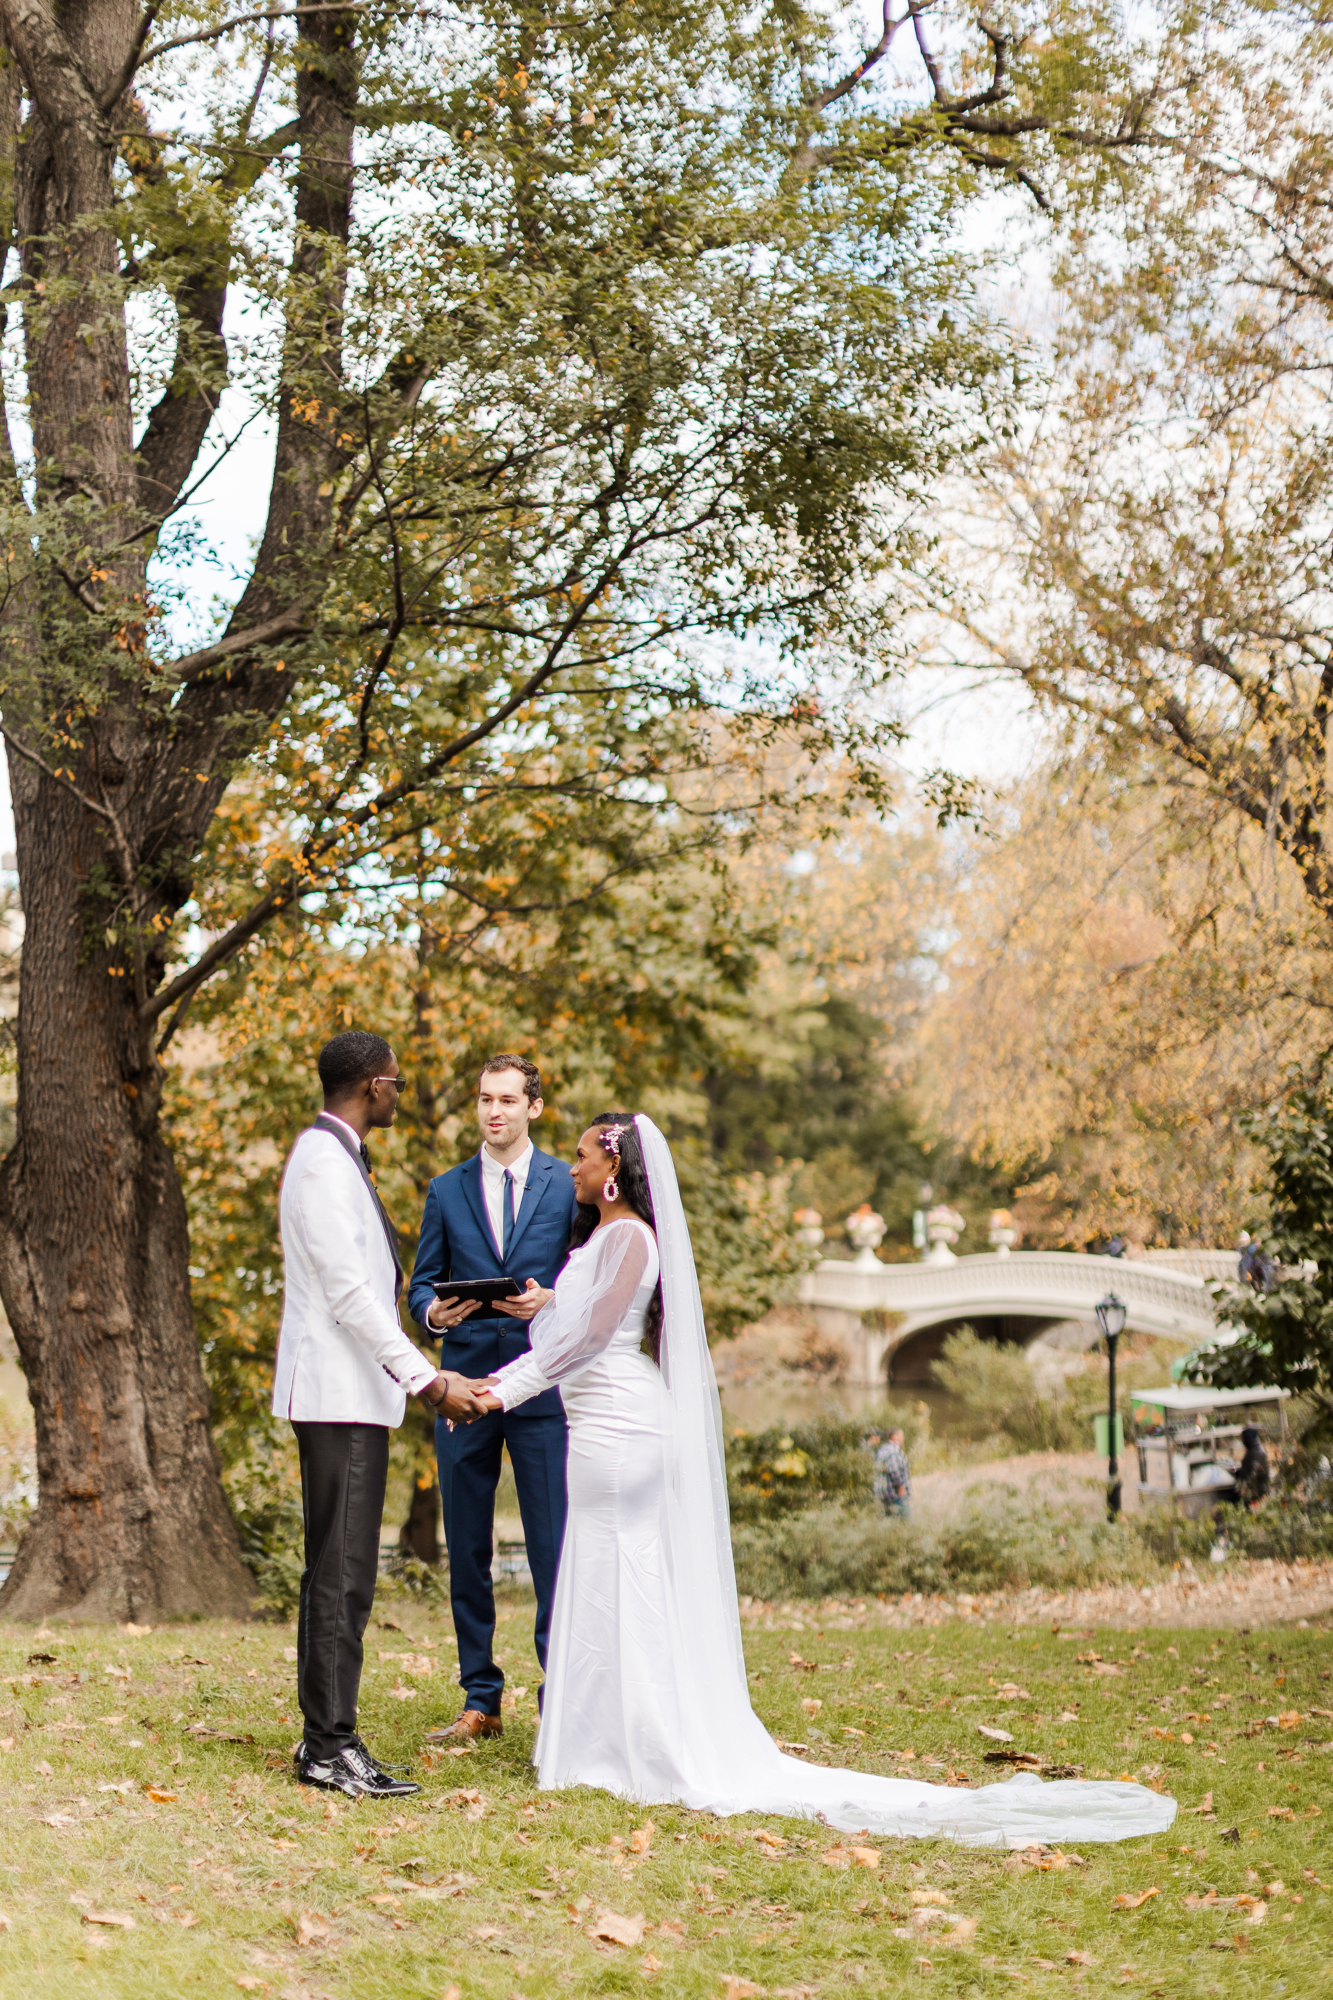 Memorable Central Park Wedding Photos on Cherry Hill in Fall